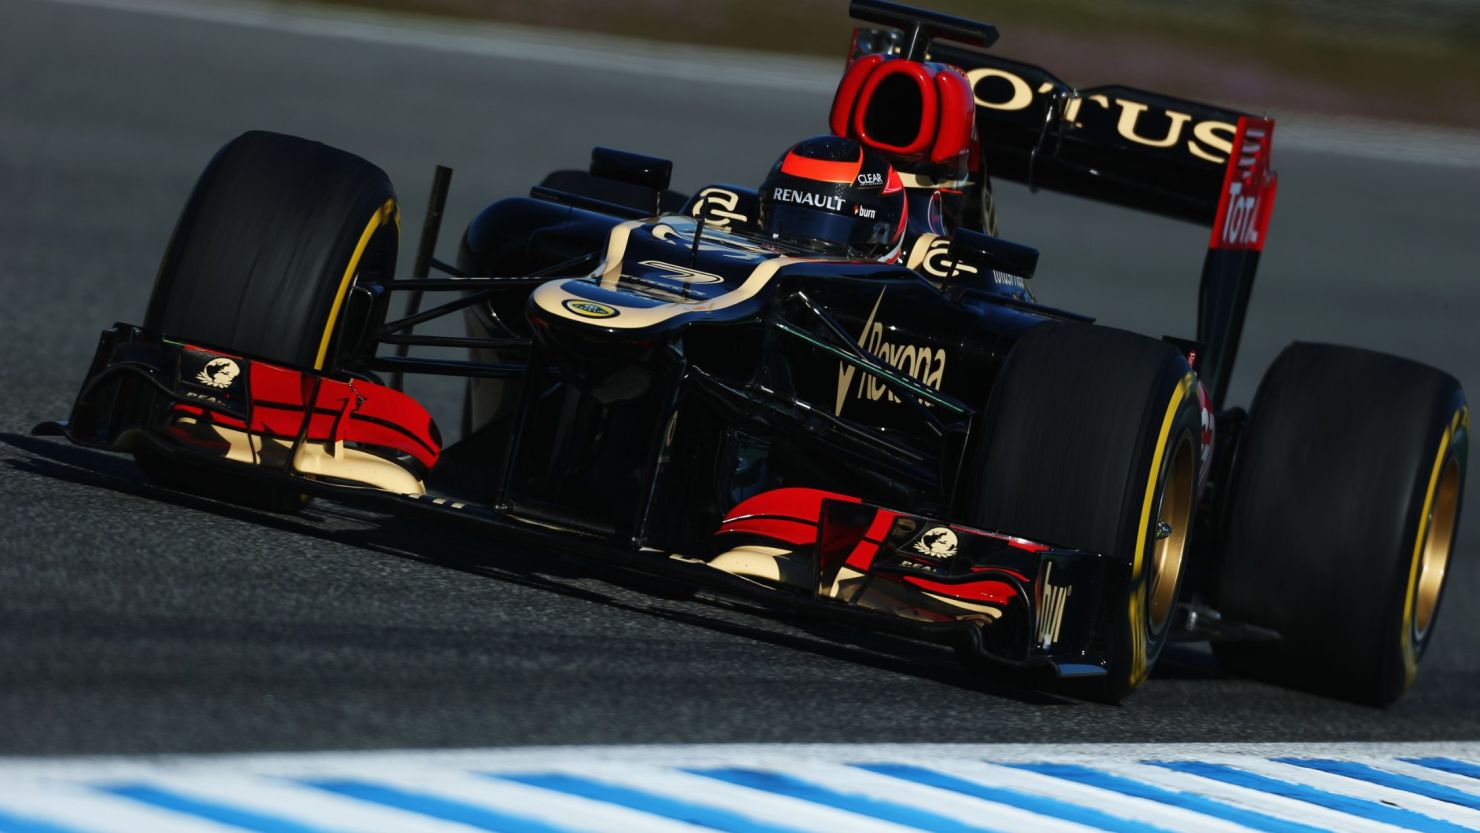 Kimi Raikkonen was the fastest man on the track on the fourth and final day of testing at Jerez, Spain.